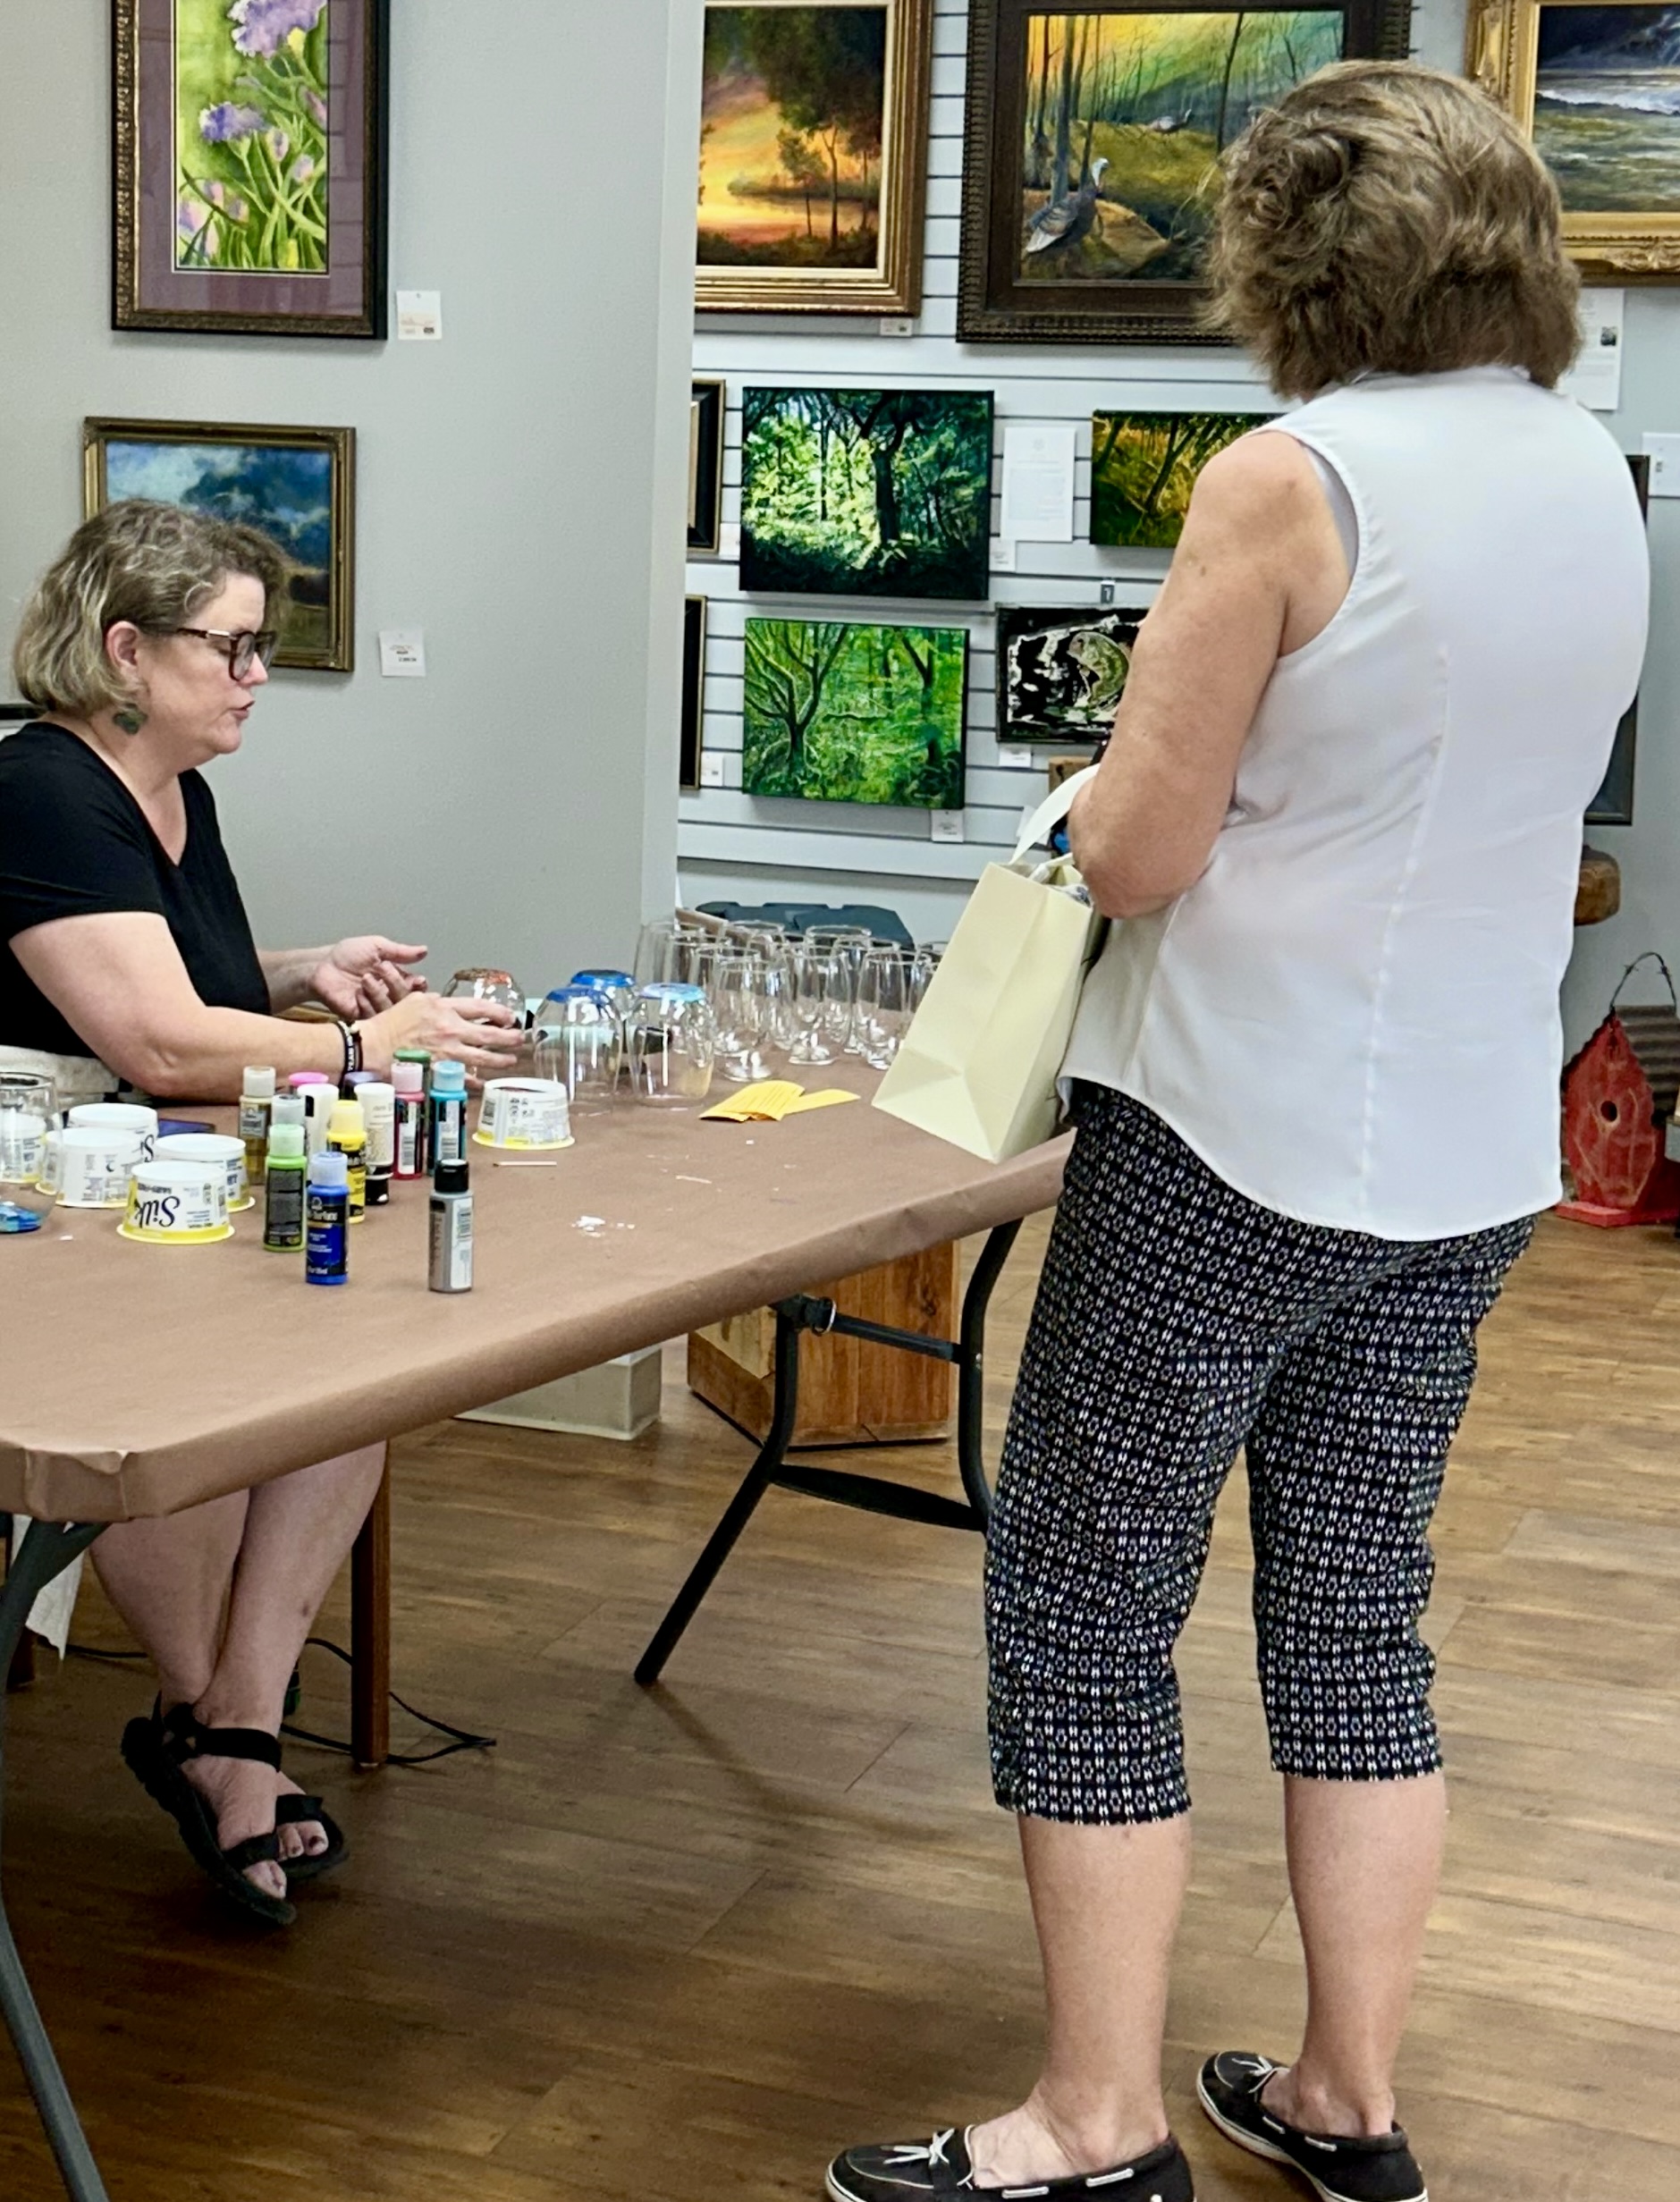 Kristin Law, seated, demonstrates the class painting station offered at Black Belt Treasures Cultural Arts Center.